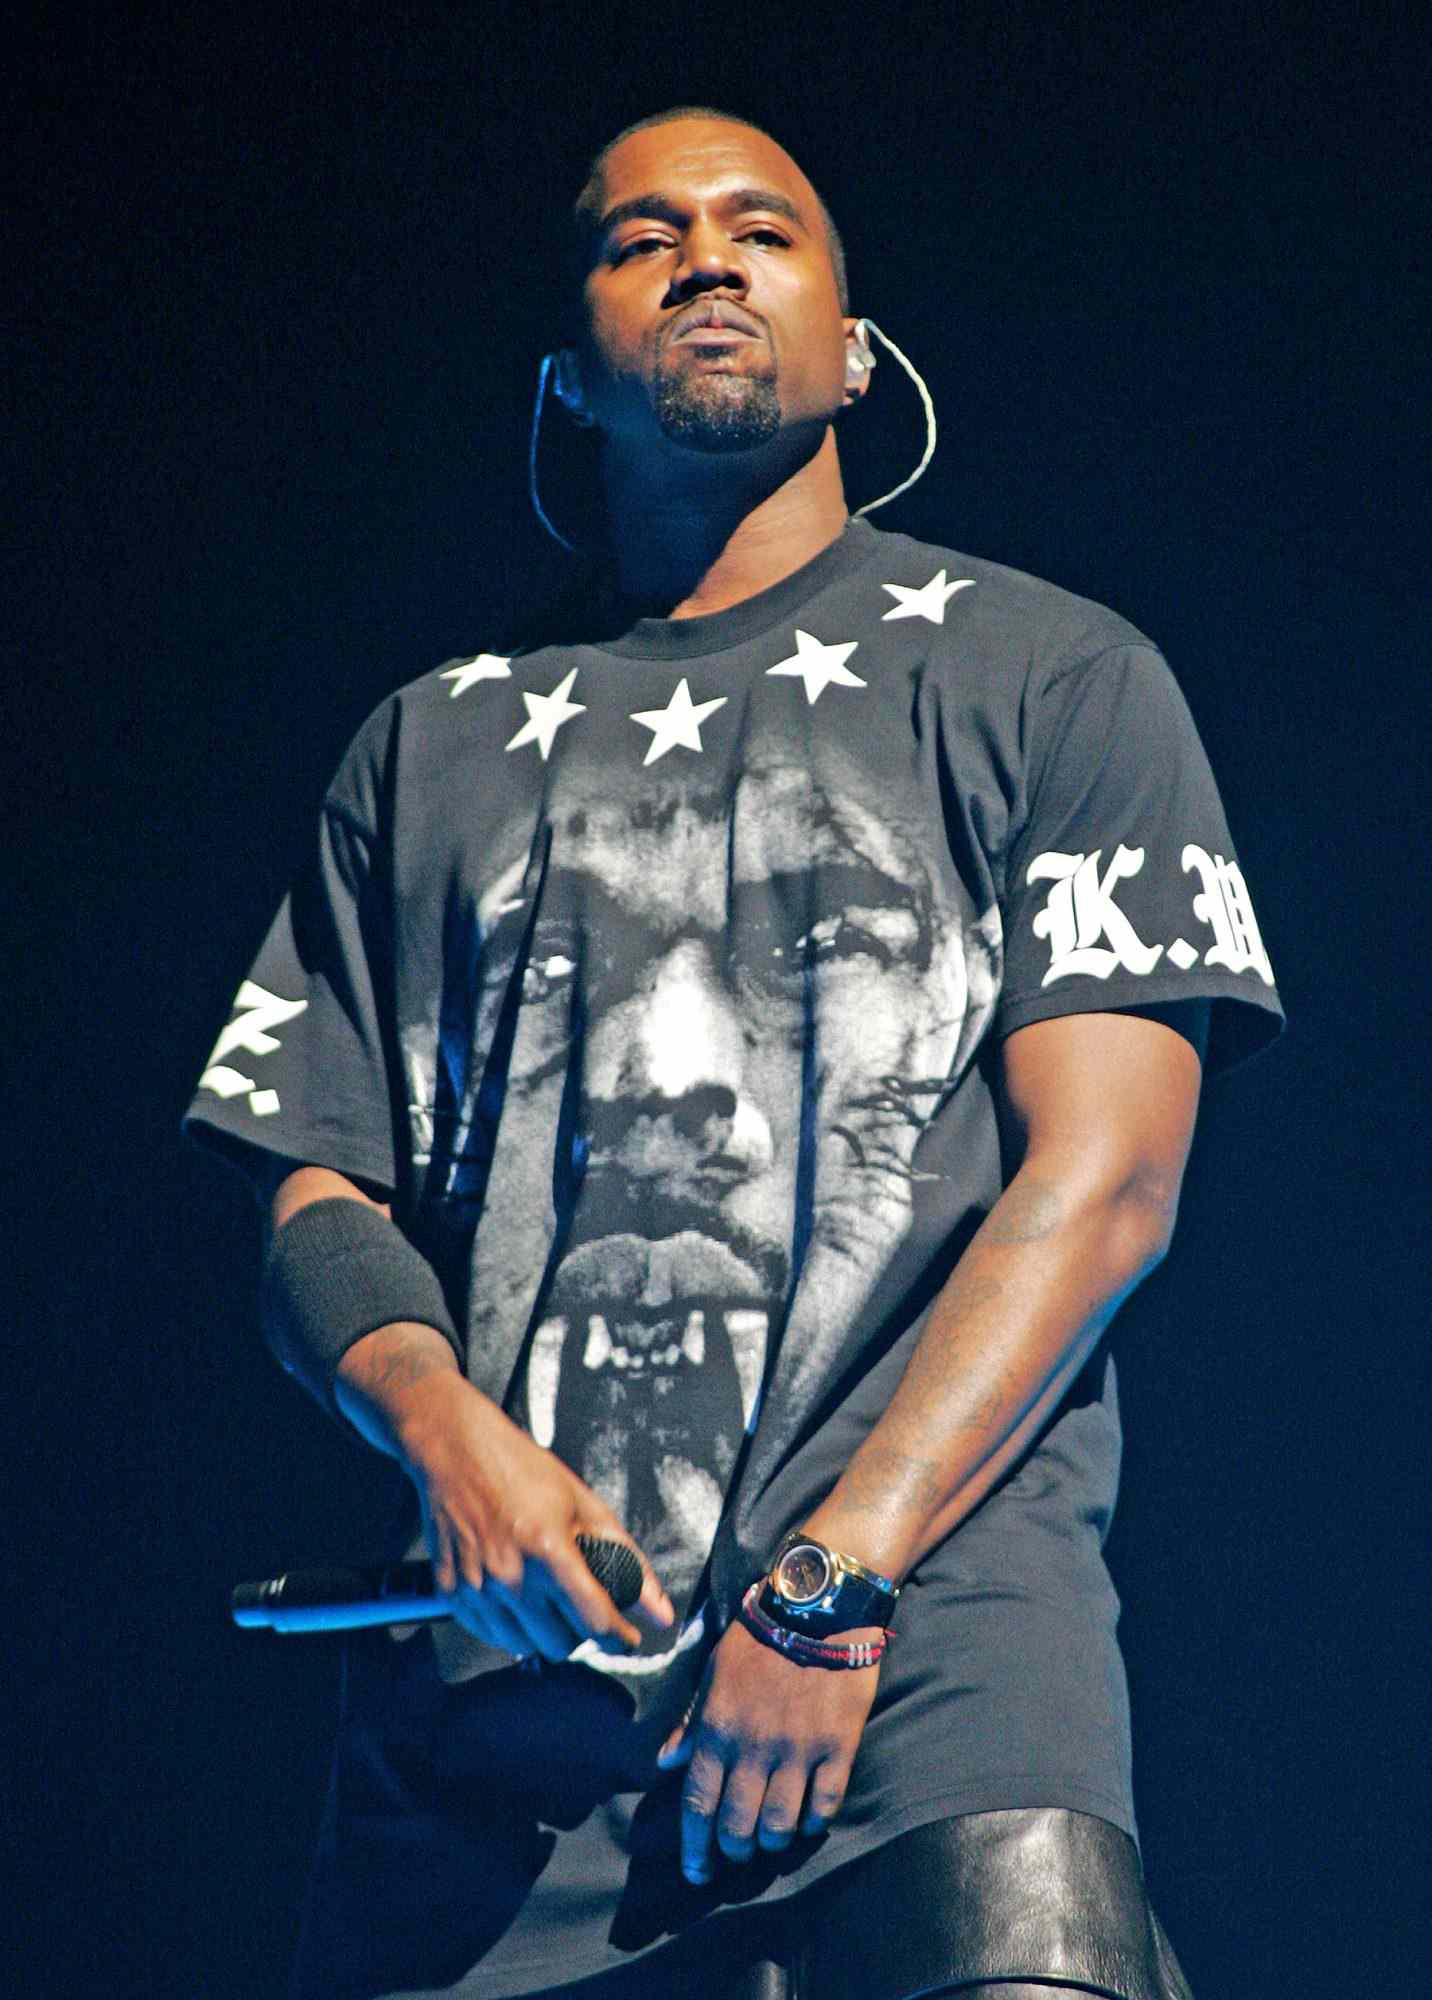 Jay-Z And Kanye West &quot;Watch The Throne&quot; Tour In Kansas City